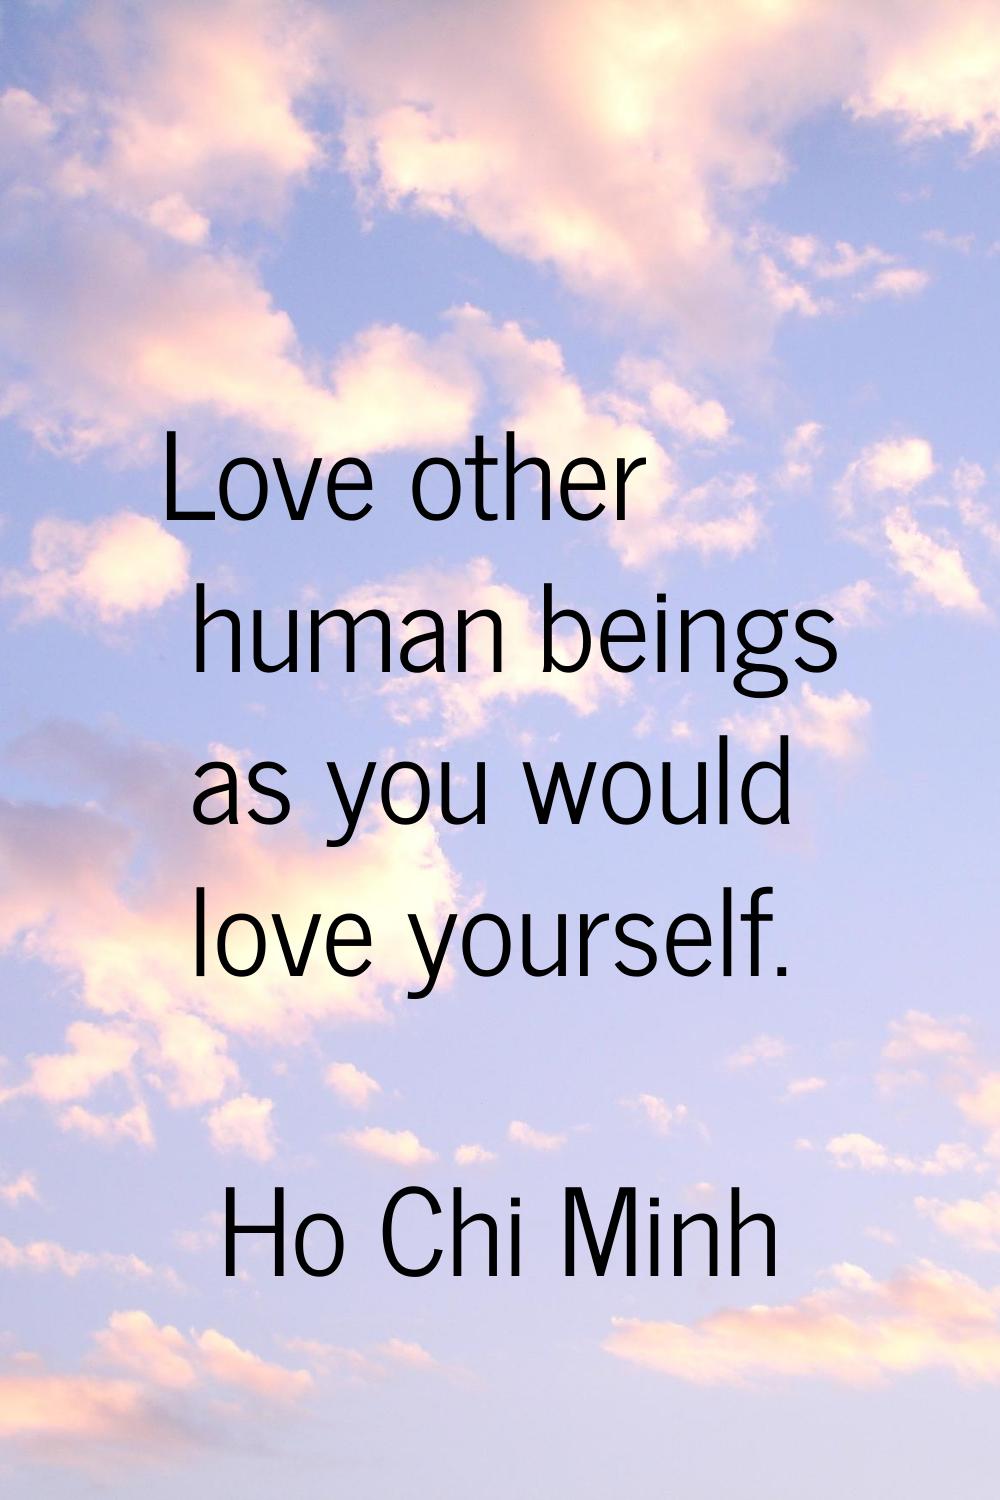 Love other human beings as you would love yourself.